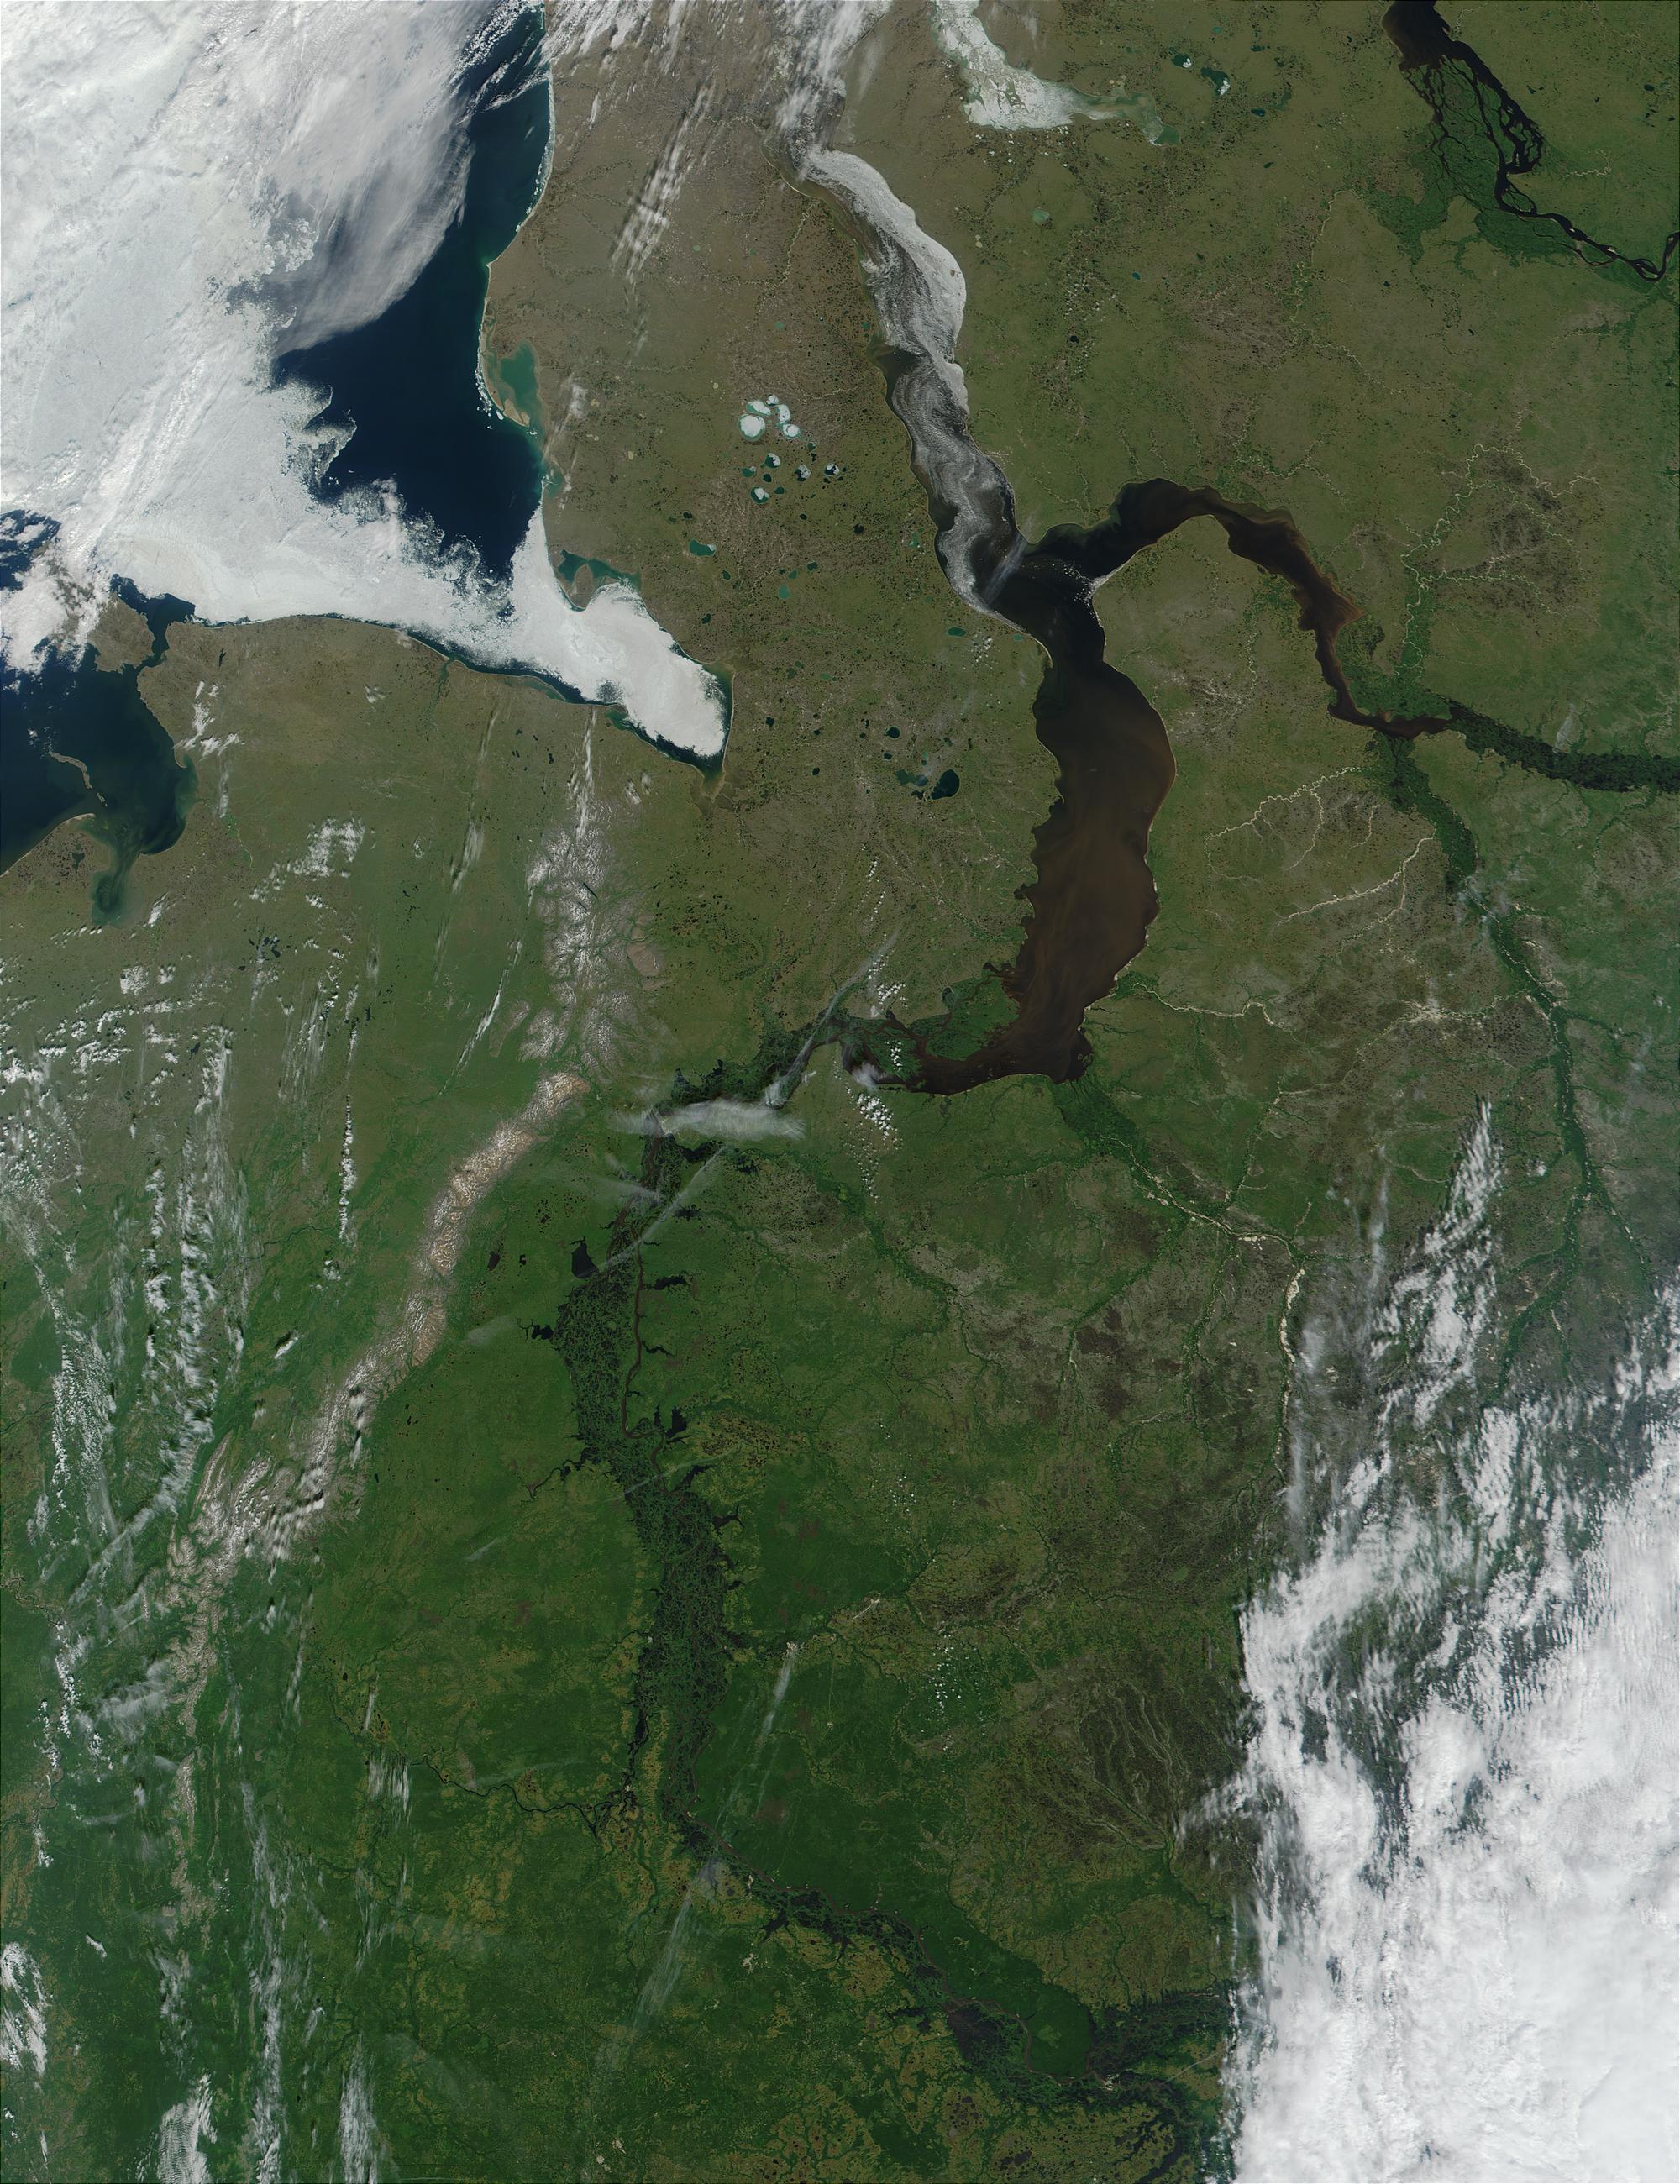 Ural Mountains and Mouth of the Ob River (Obskaya Guba), Northern Russia - related image preview